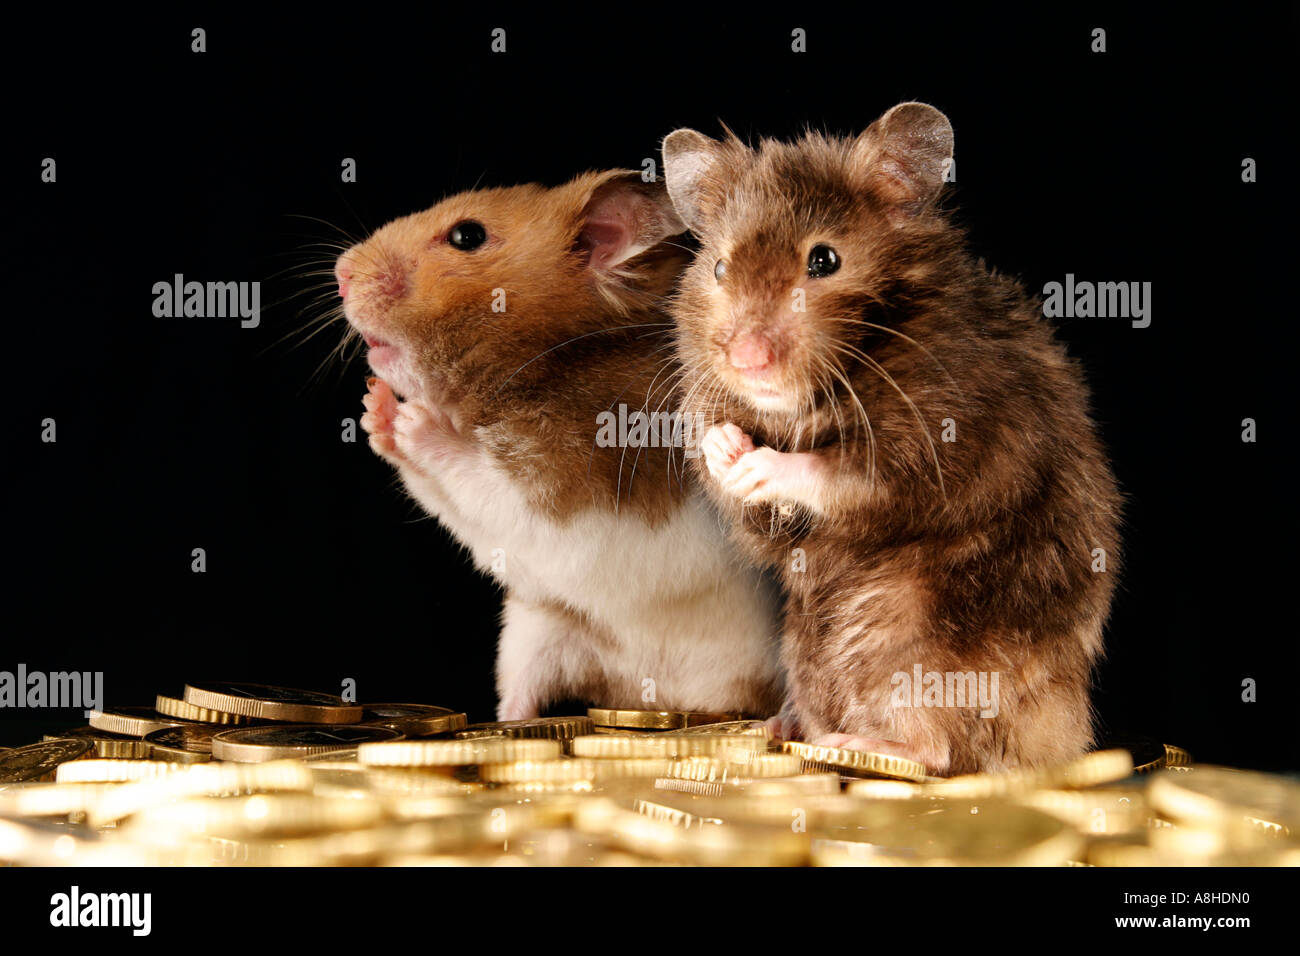 Golden hamster with euros Stock Photo